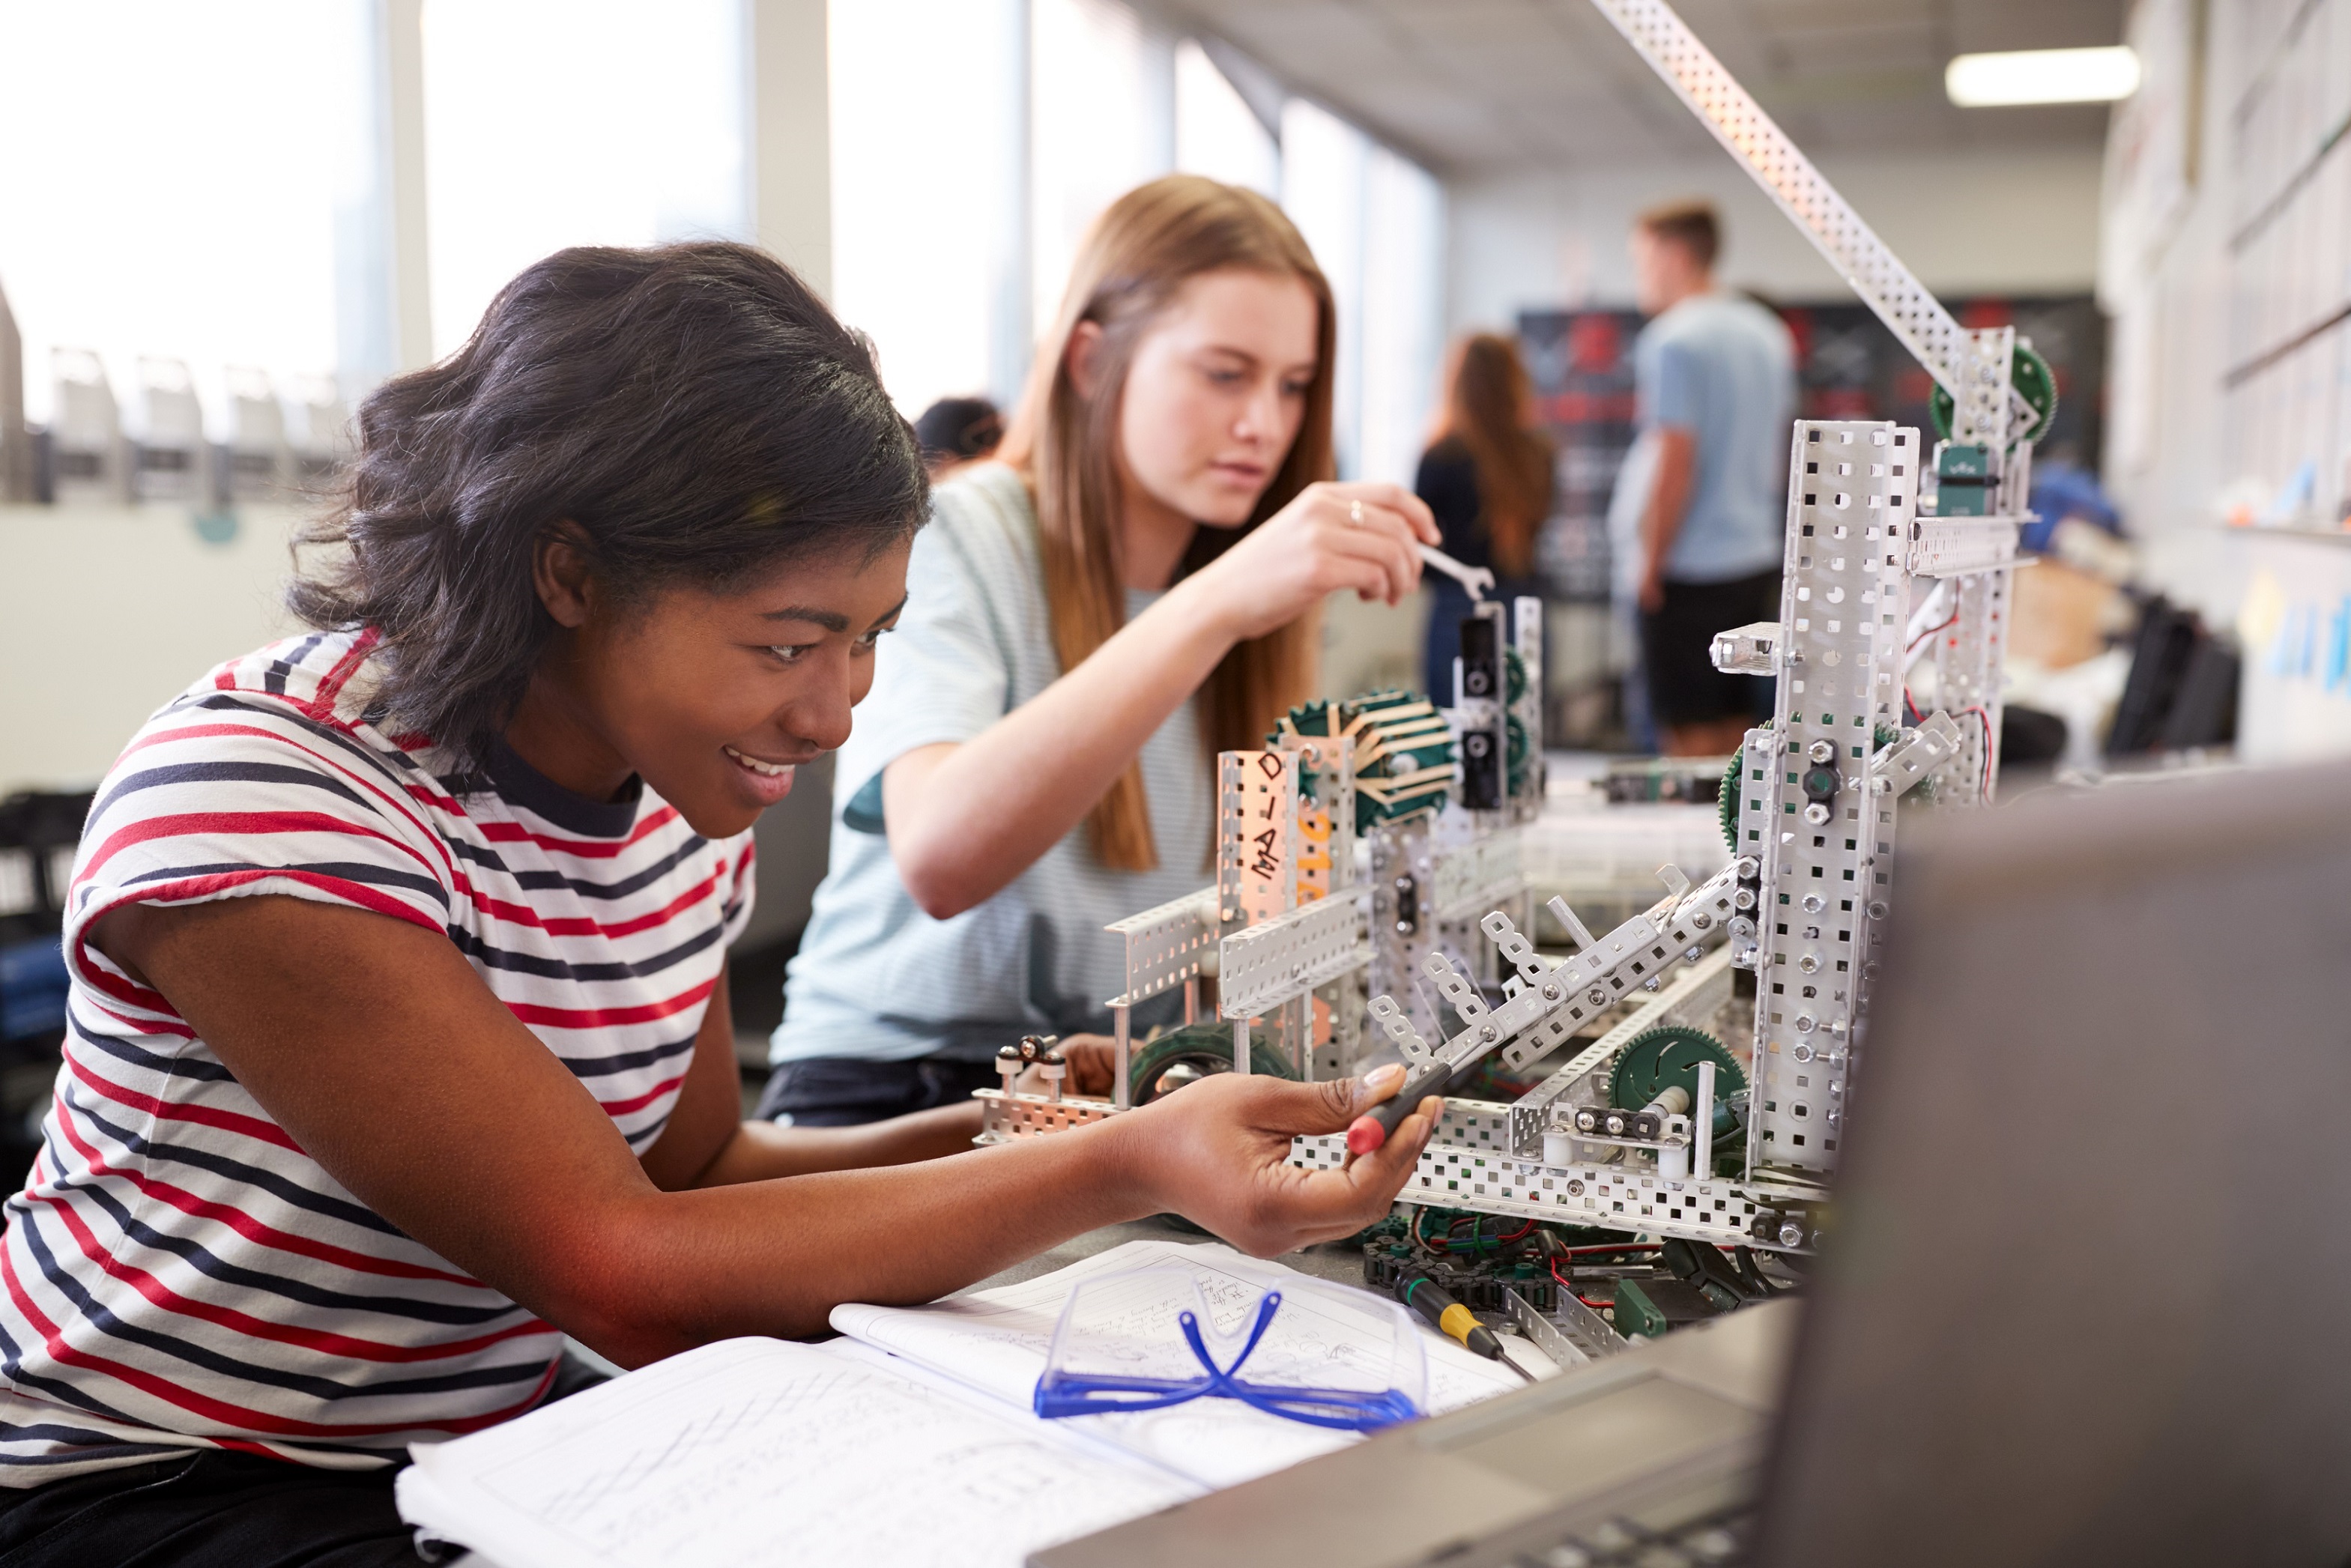 Rising to the challenge of providing all students with high-quality STEM  education